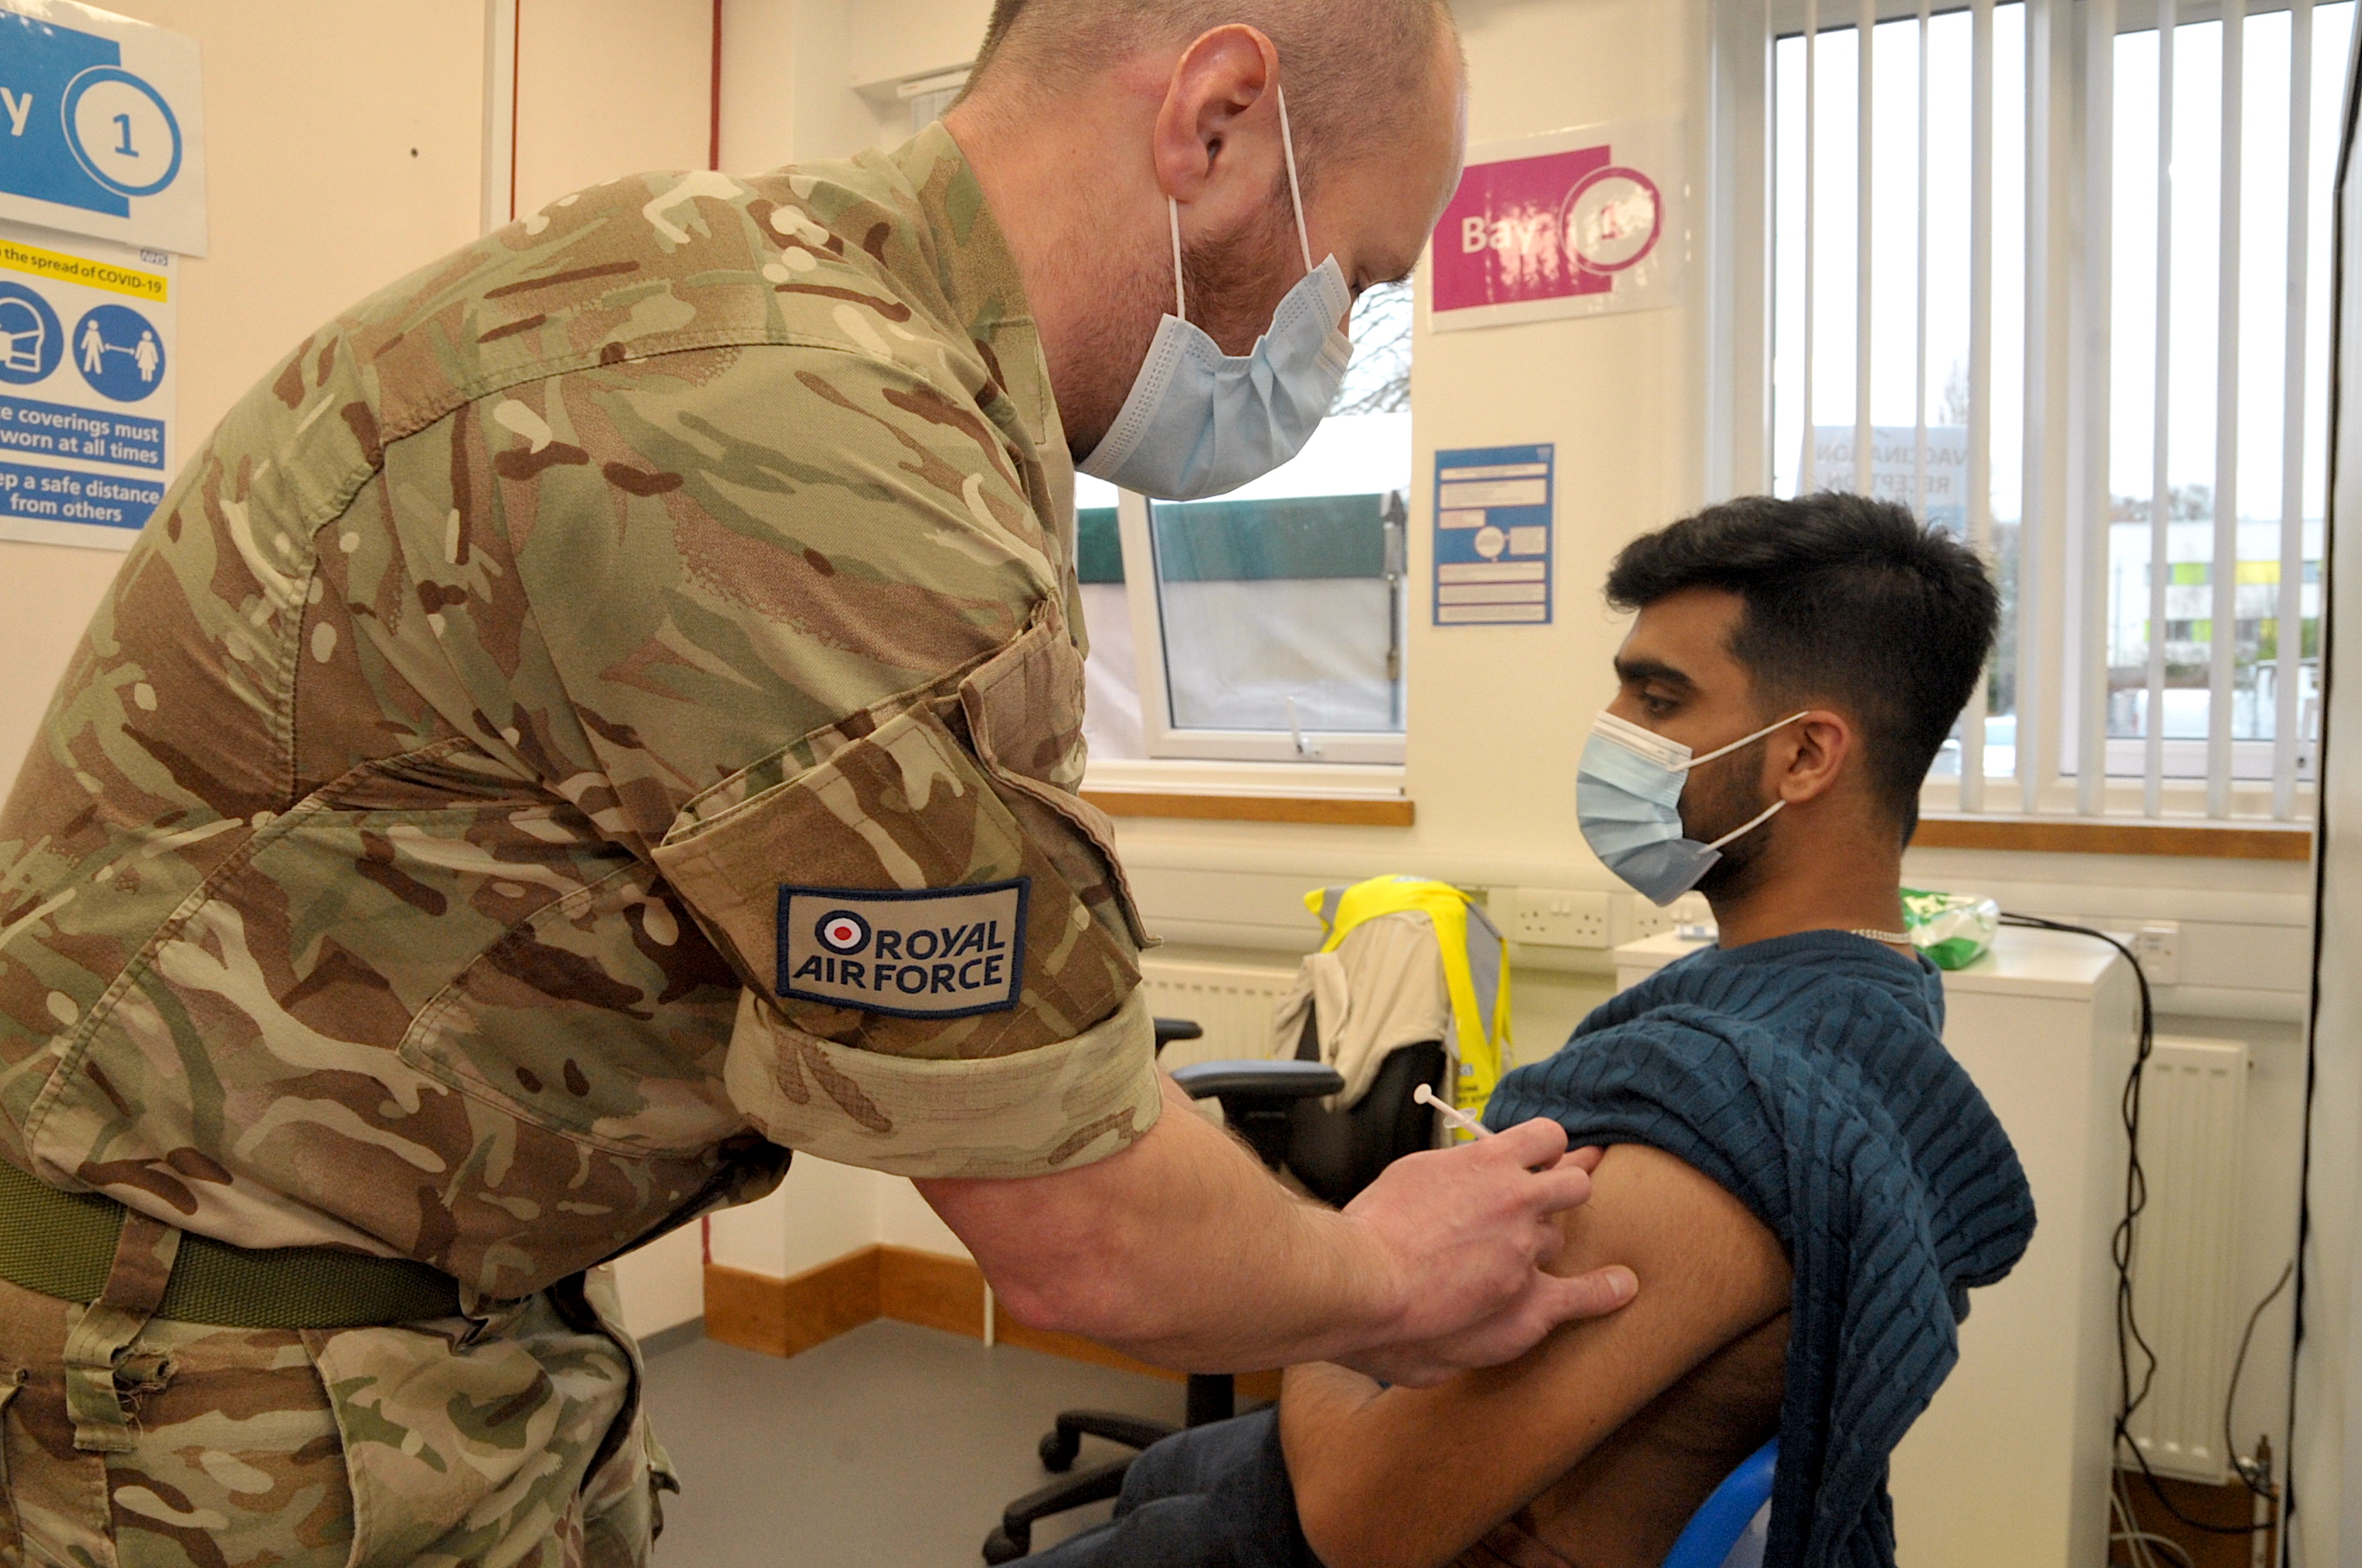 Image shows RAF personnel administering a vaccine.